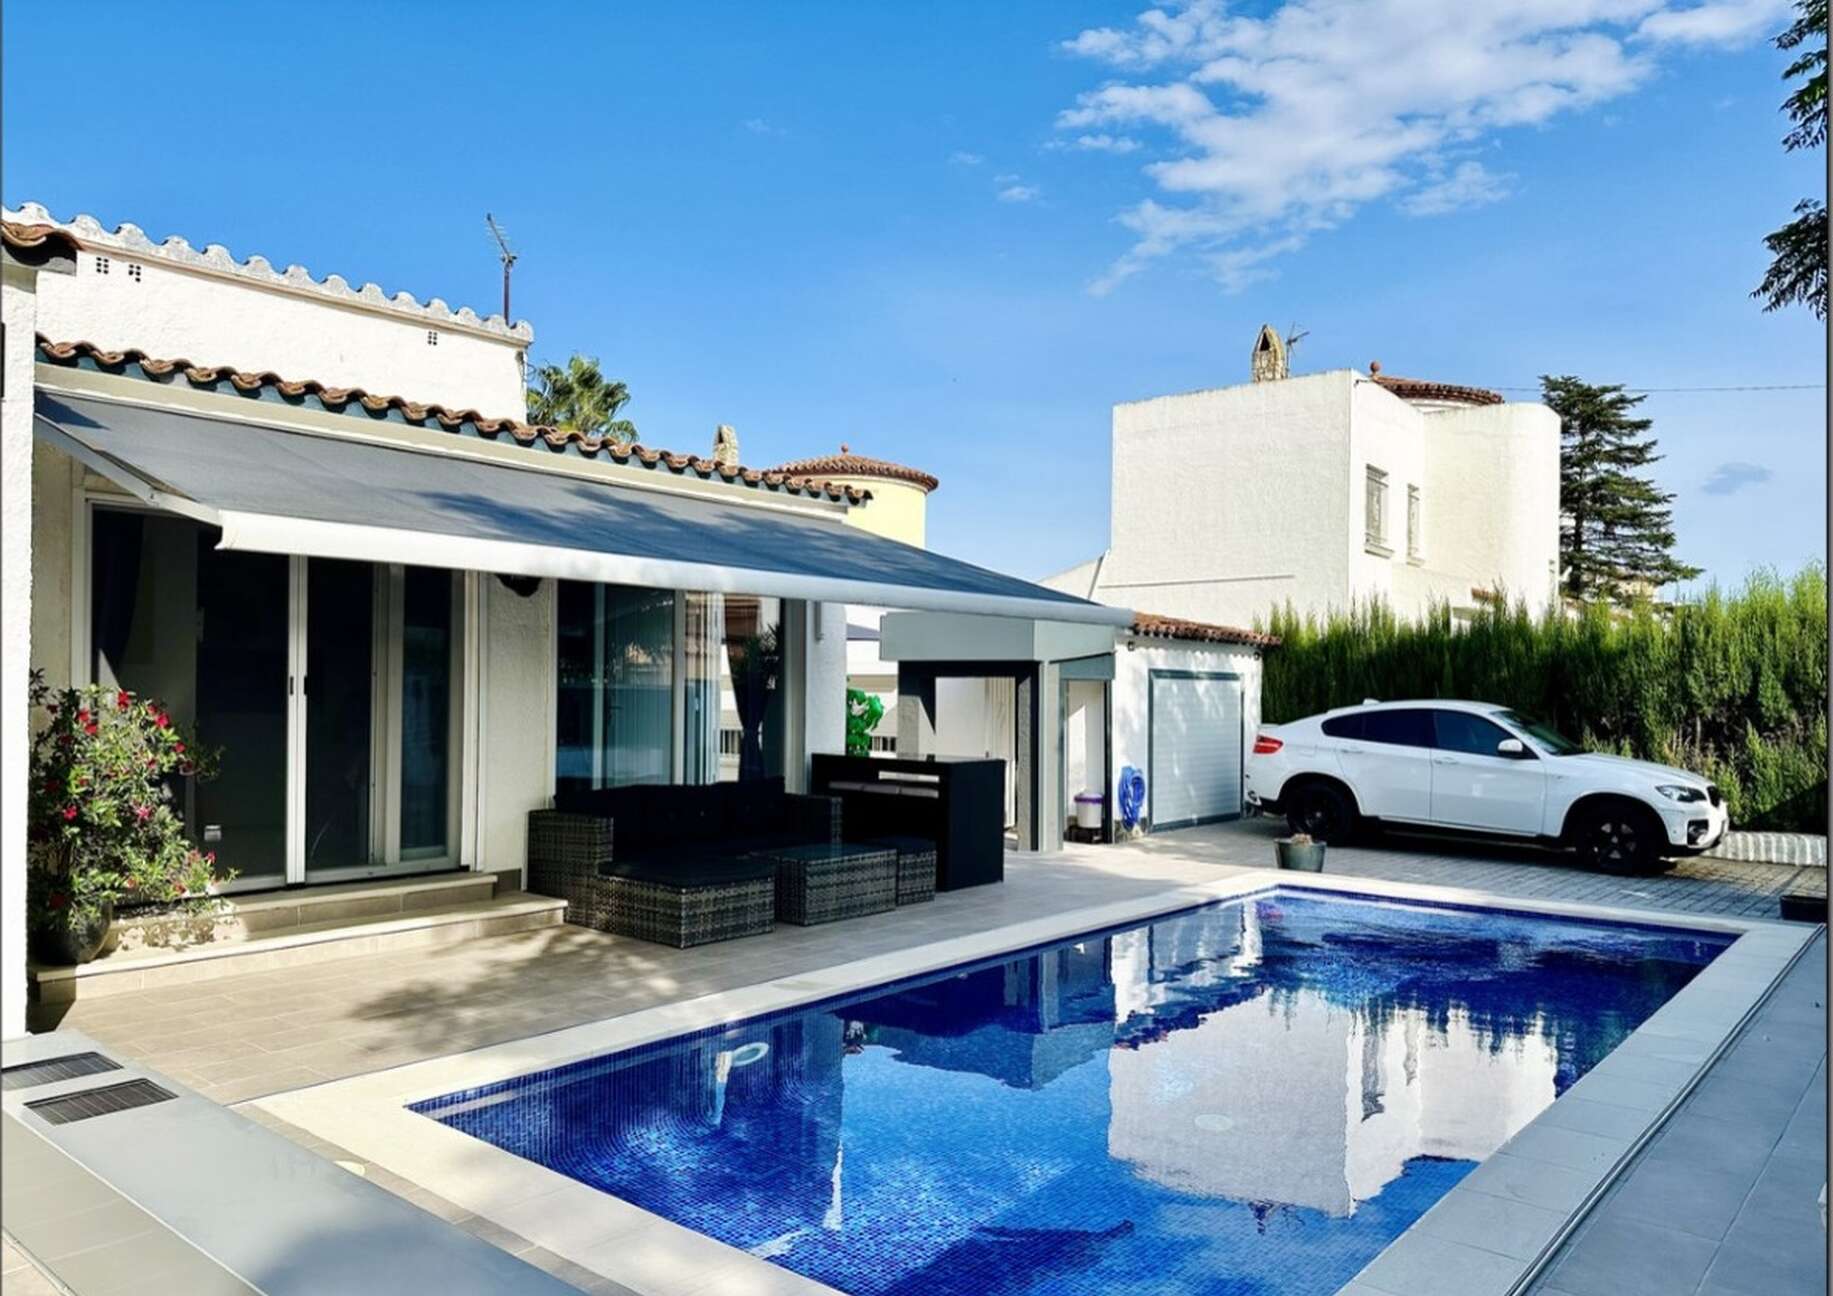 Renovated house with pool near the beach in Empuriabrava.